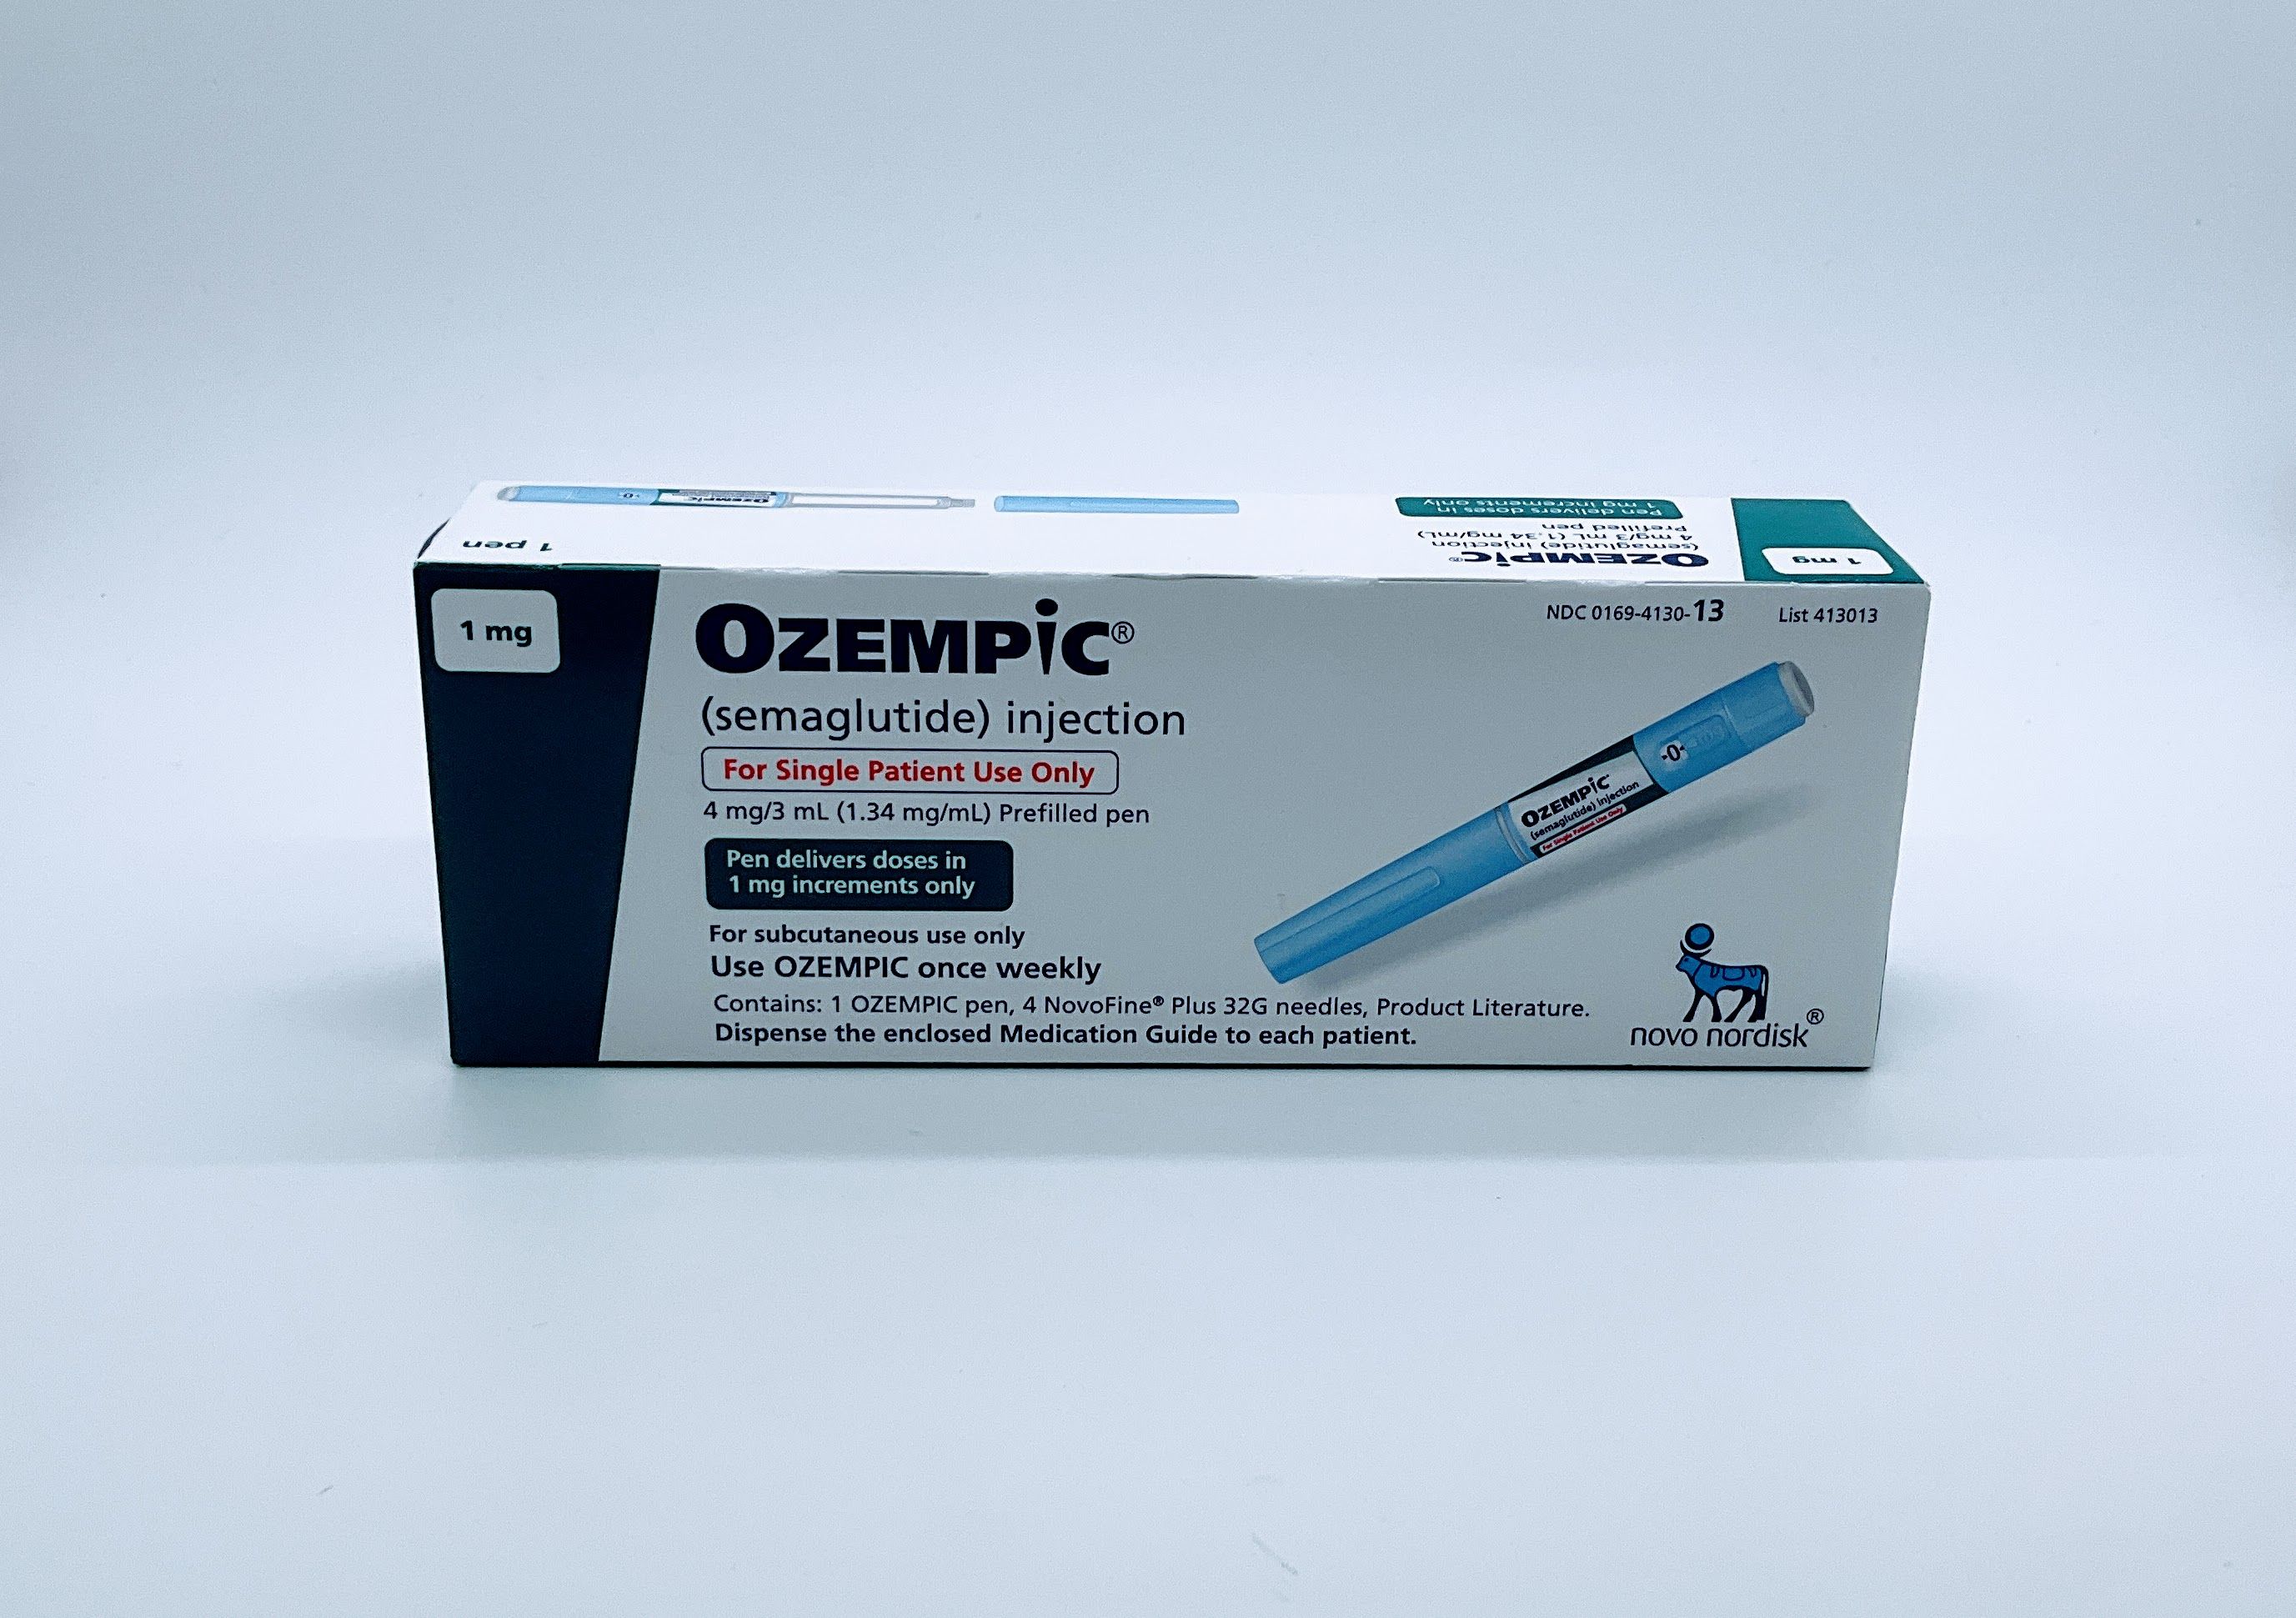 How to Use an Ozempic pen? – 4AllFamily